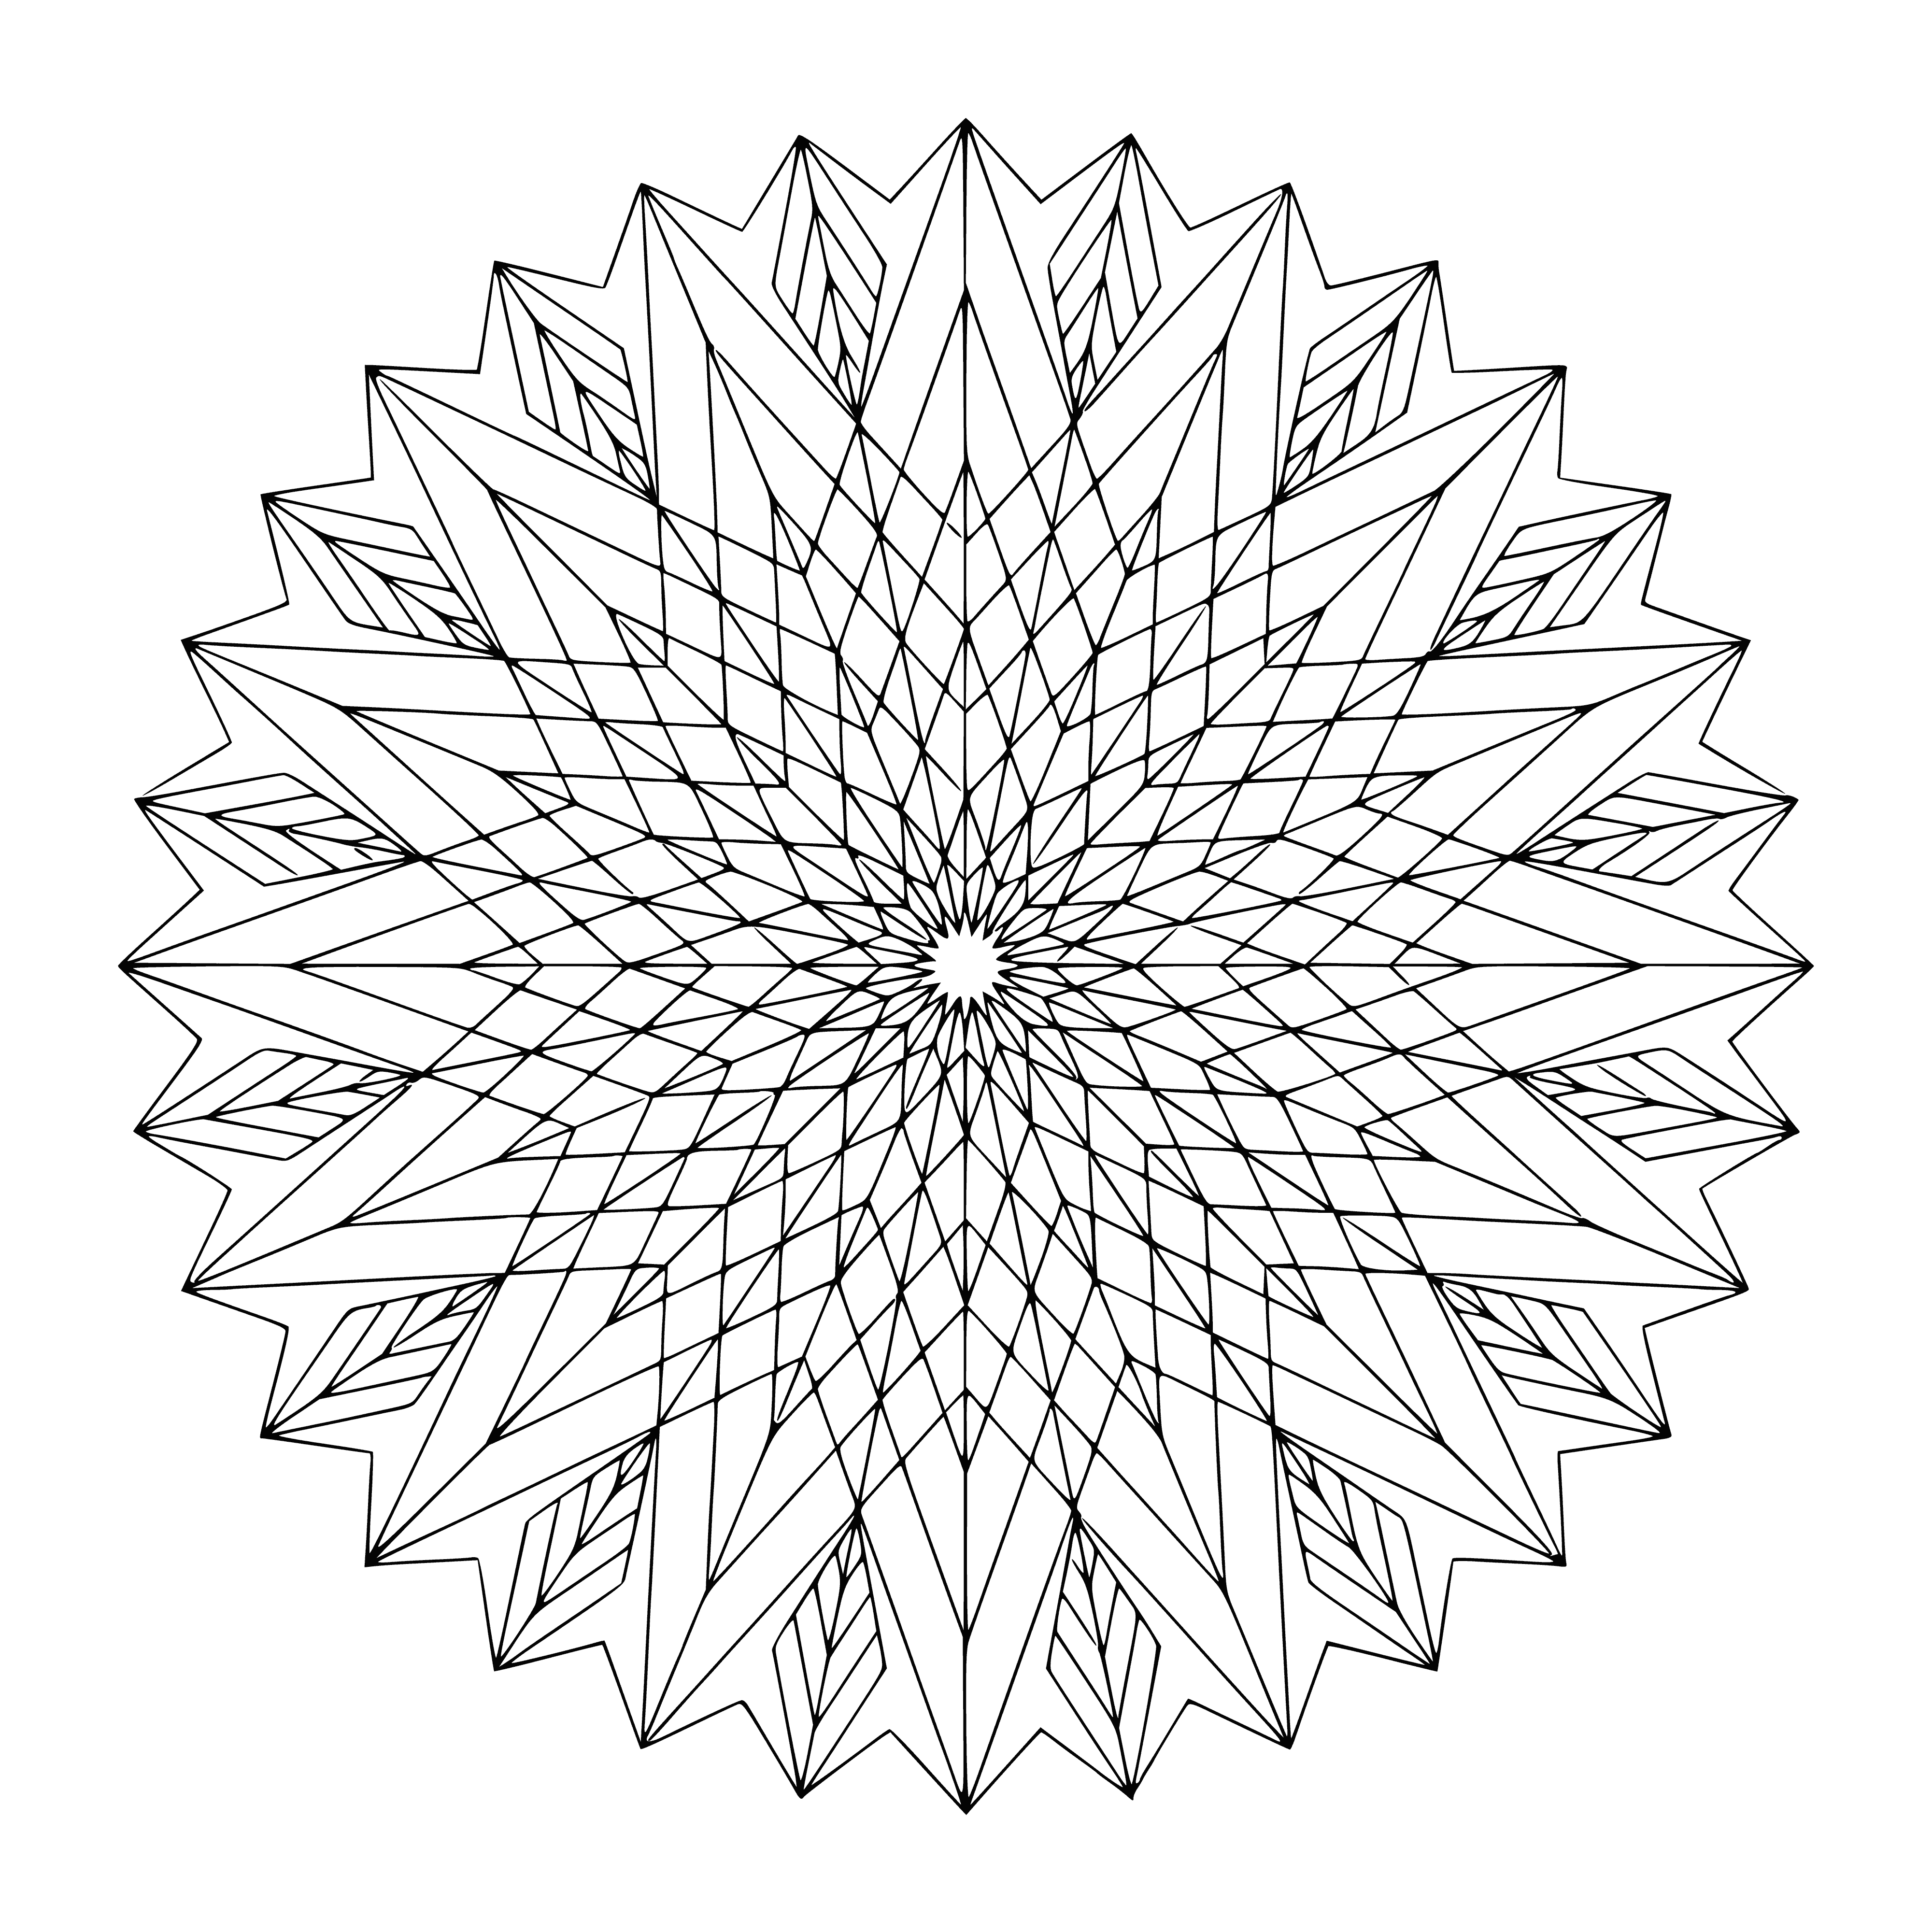 coloring page: A central circle with intricate shapes radiating out from it. Filled with triangles, squares, stars and different colors for enjoyment. #Coloring #Art #Design